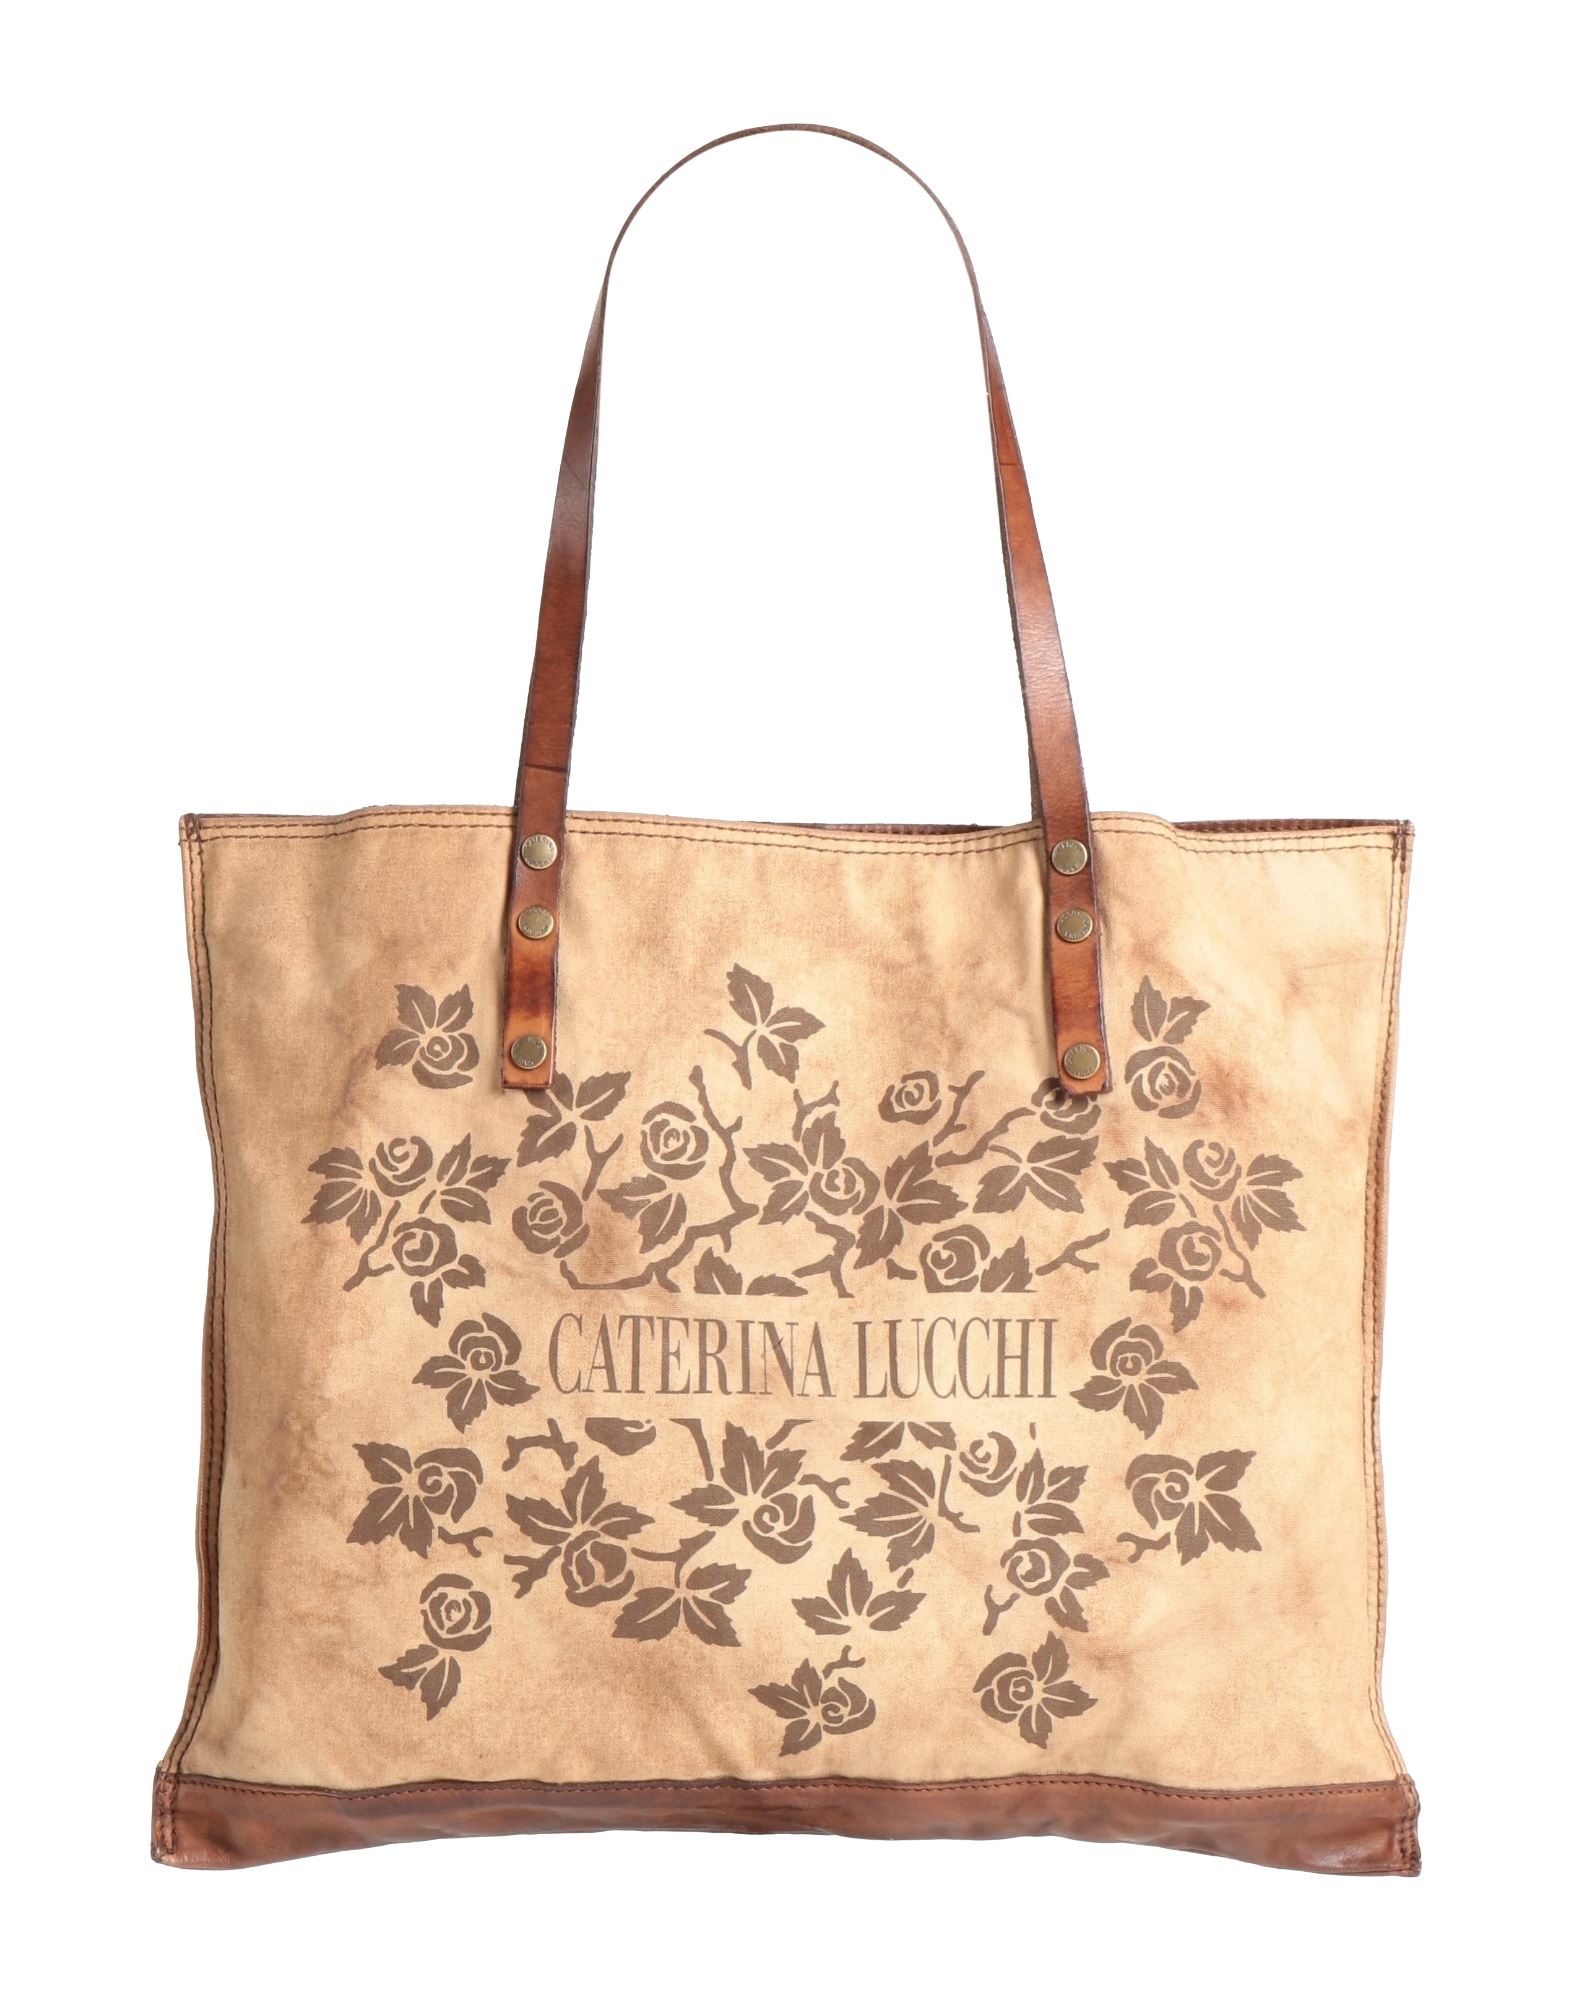 Caterina Lucchi Handbags In Sand